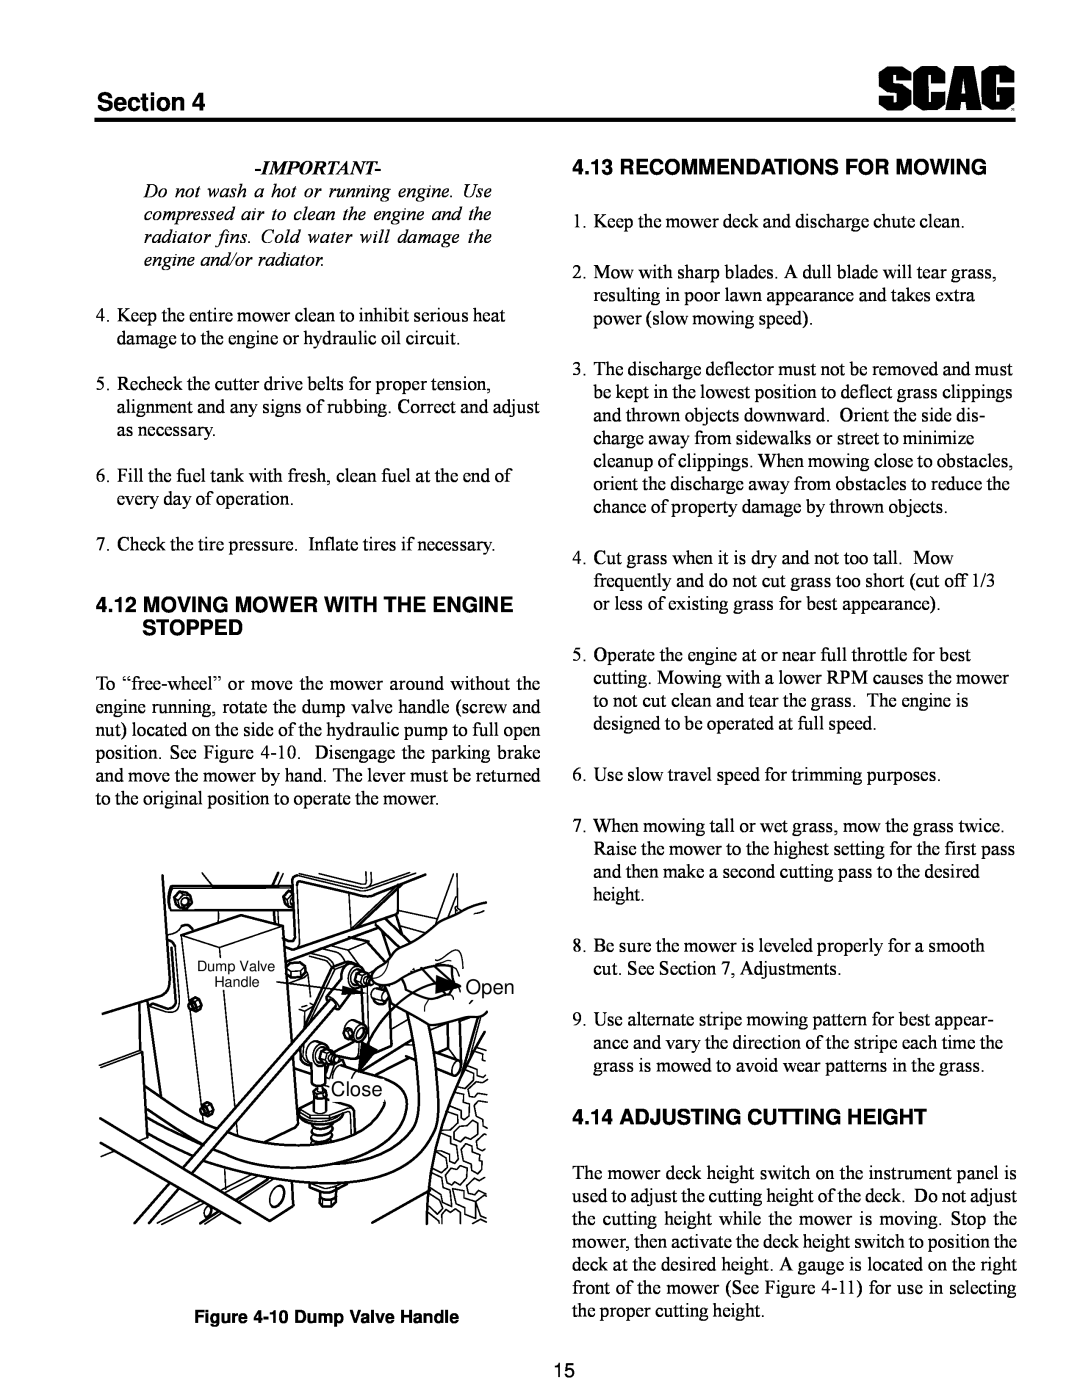 Scag Power Equipment MAG manual Moving Mower With The Engine Stopped, Recommendations For Mowing, Adjusting Cutting Height 